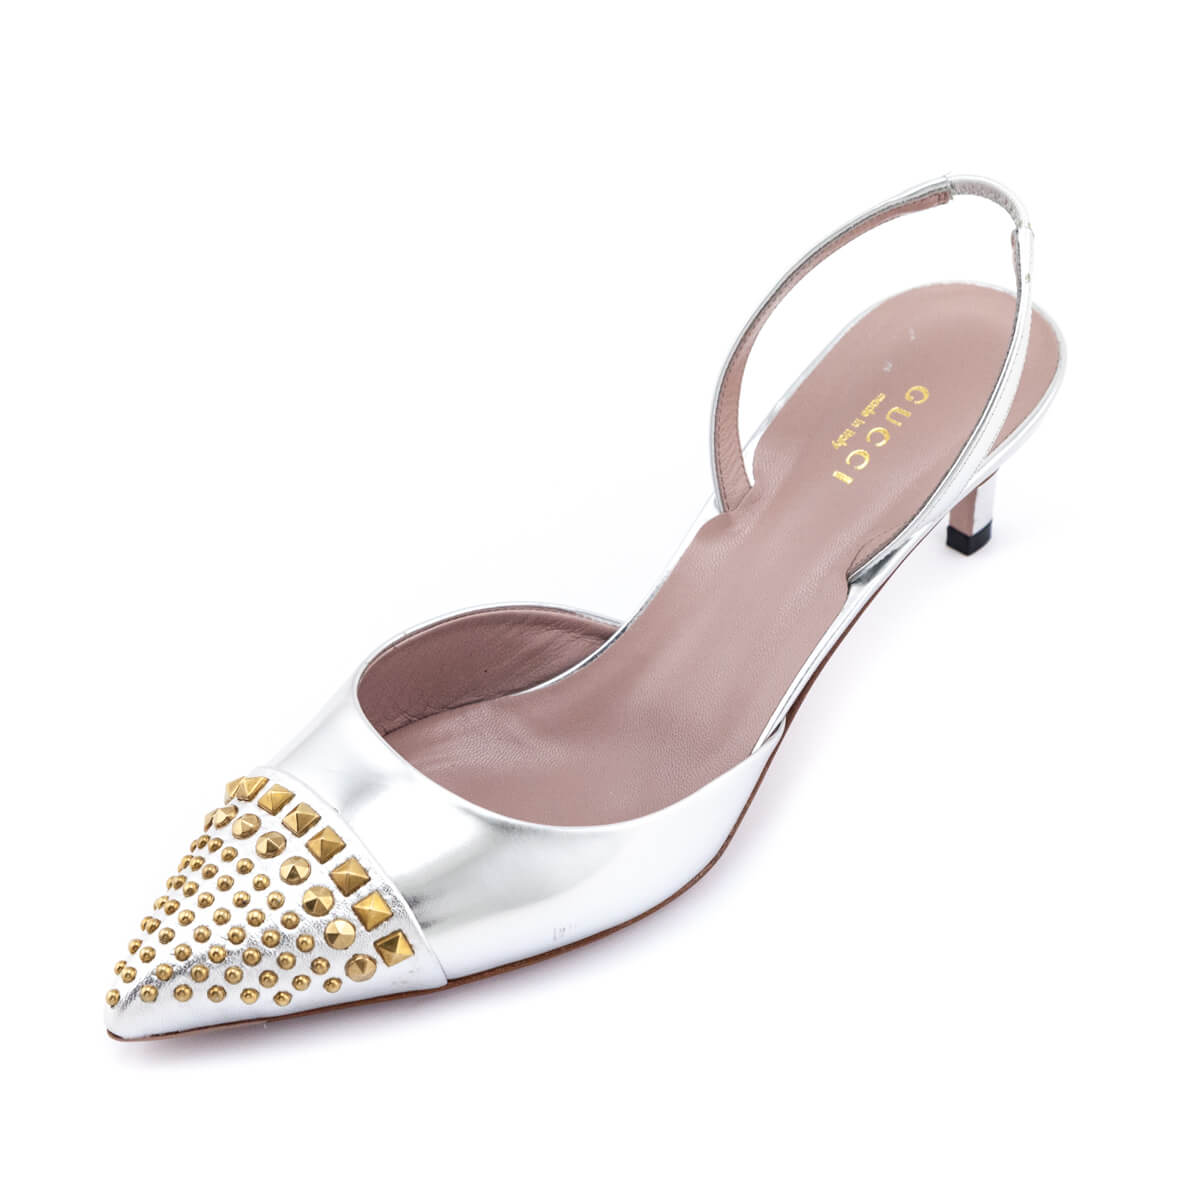 Gucci Silver & Gold-Studded Slingback Pumps Size US 9 | IT 39 - Love that Bag etc - Preowned Authentic Designer Handbags & Preloved Fashions